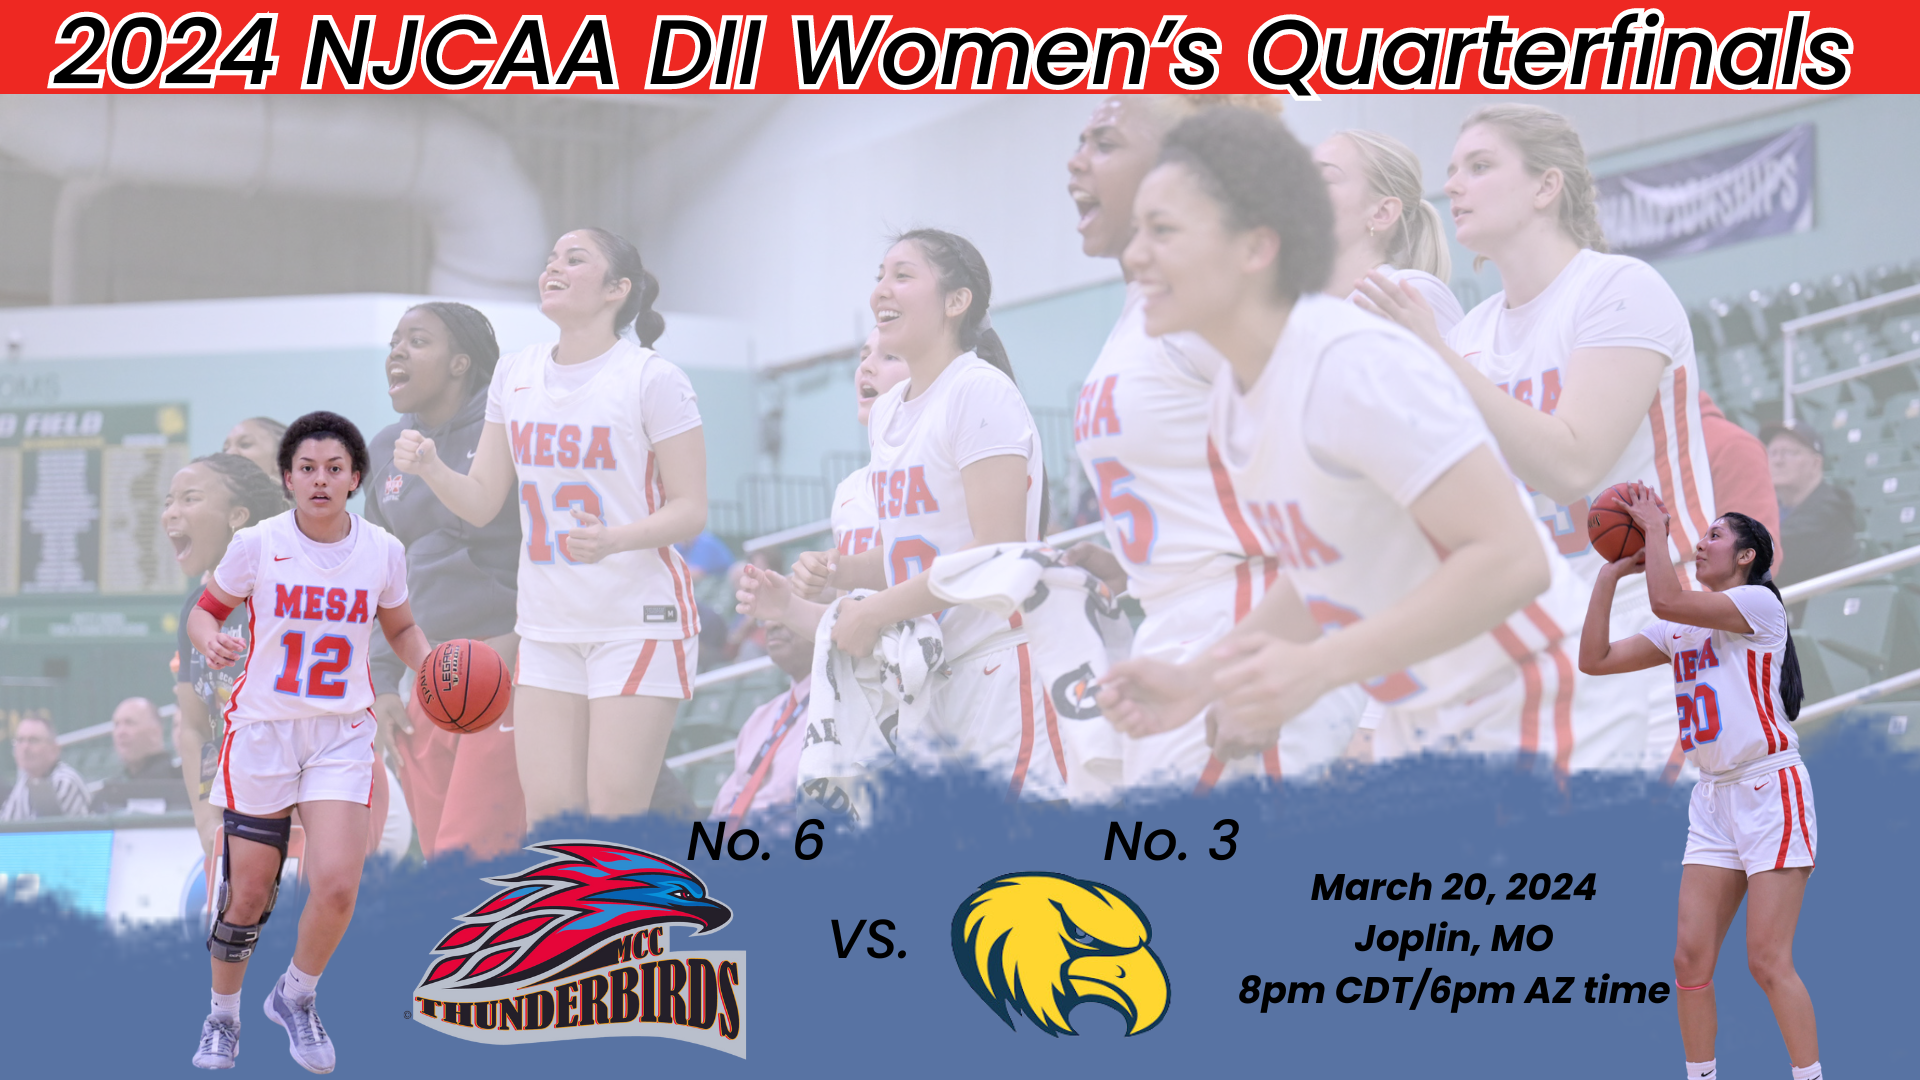 No. 6 Women's Basketball takes on No. 3 Rock Valley in the NJCAA DII National Championship Quarterfinals